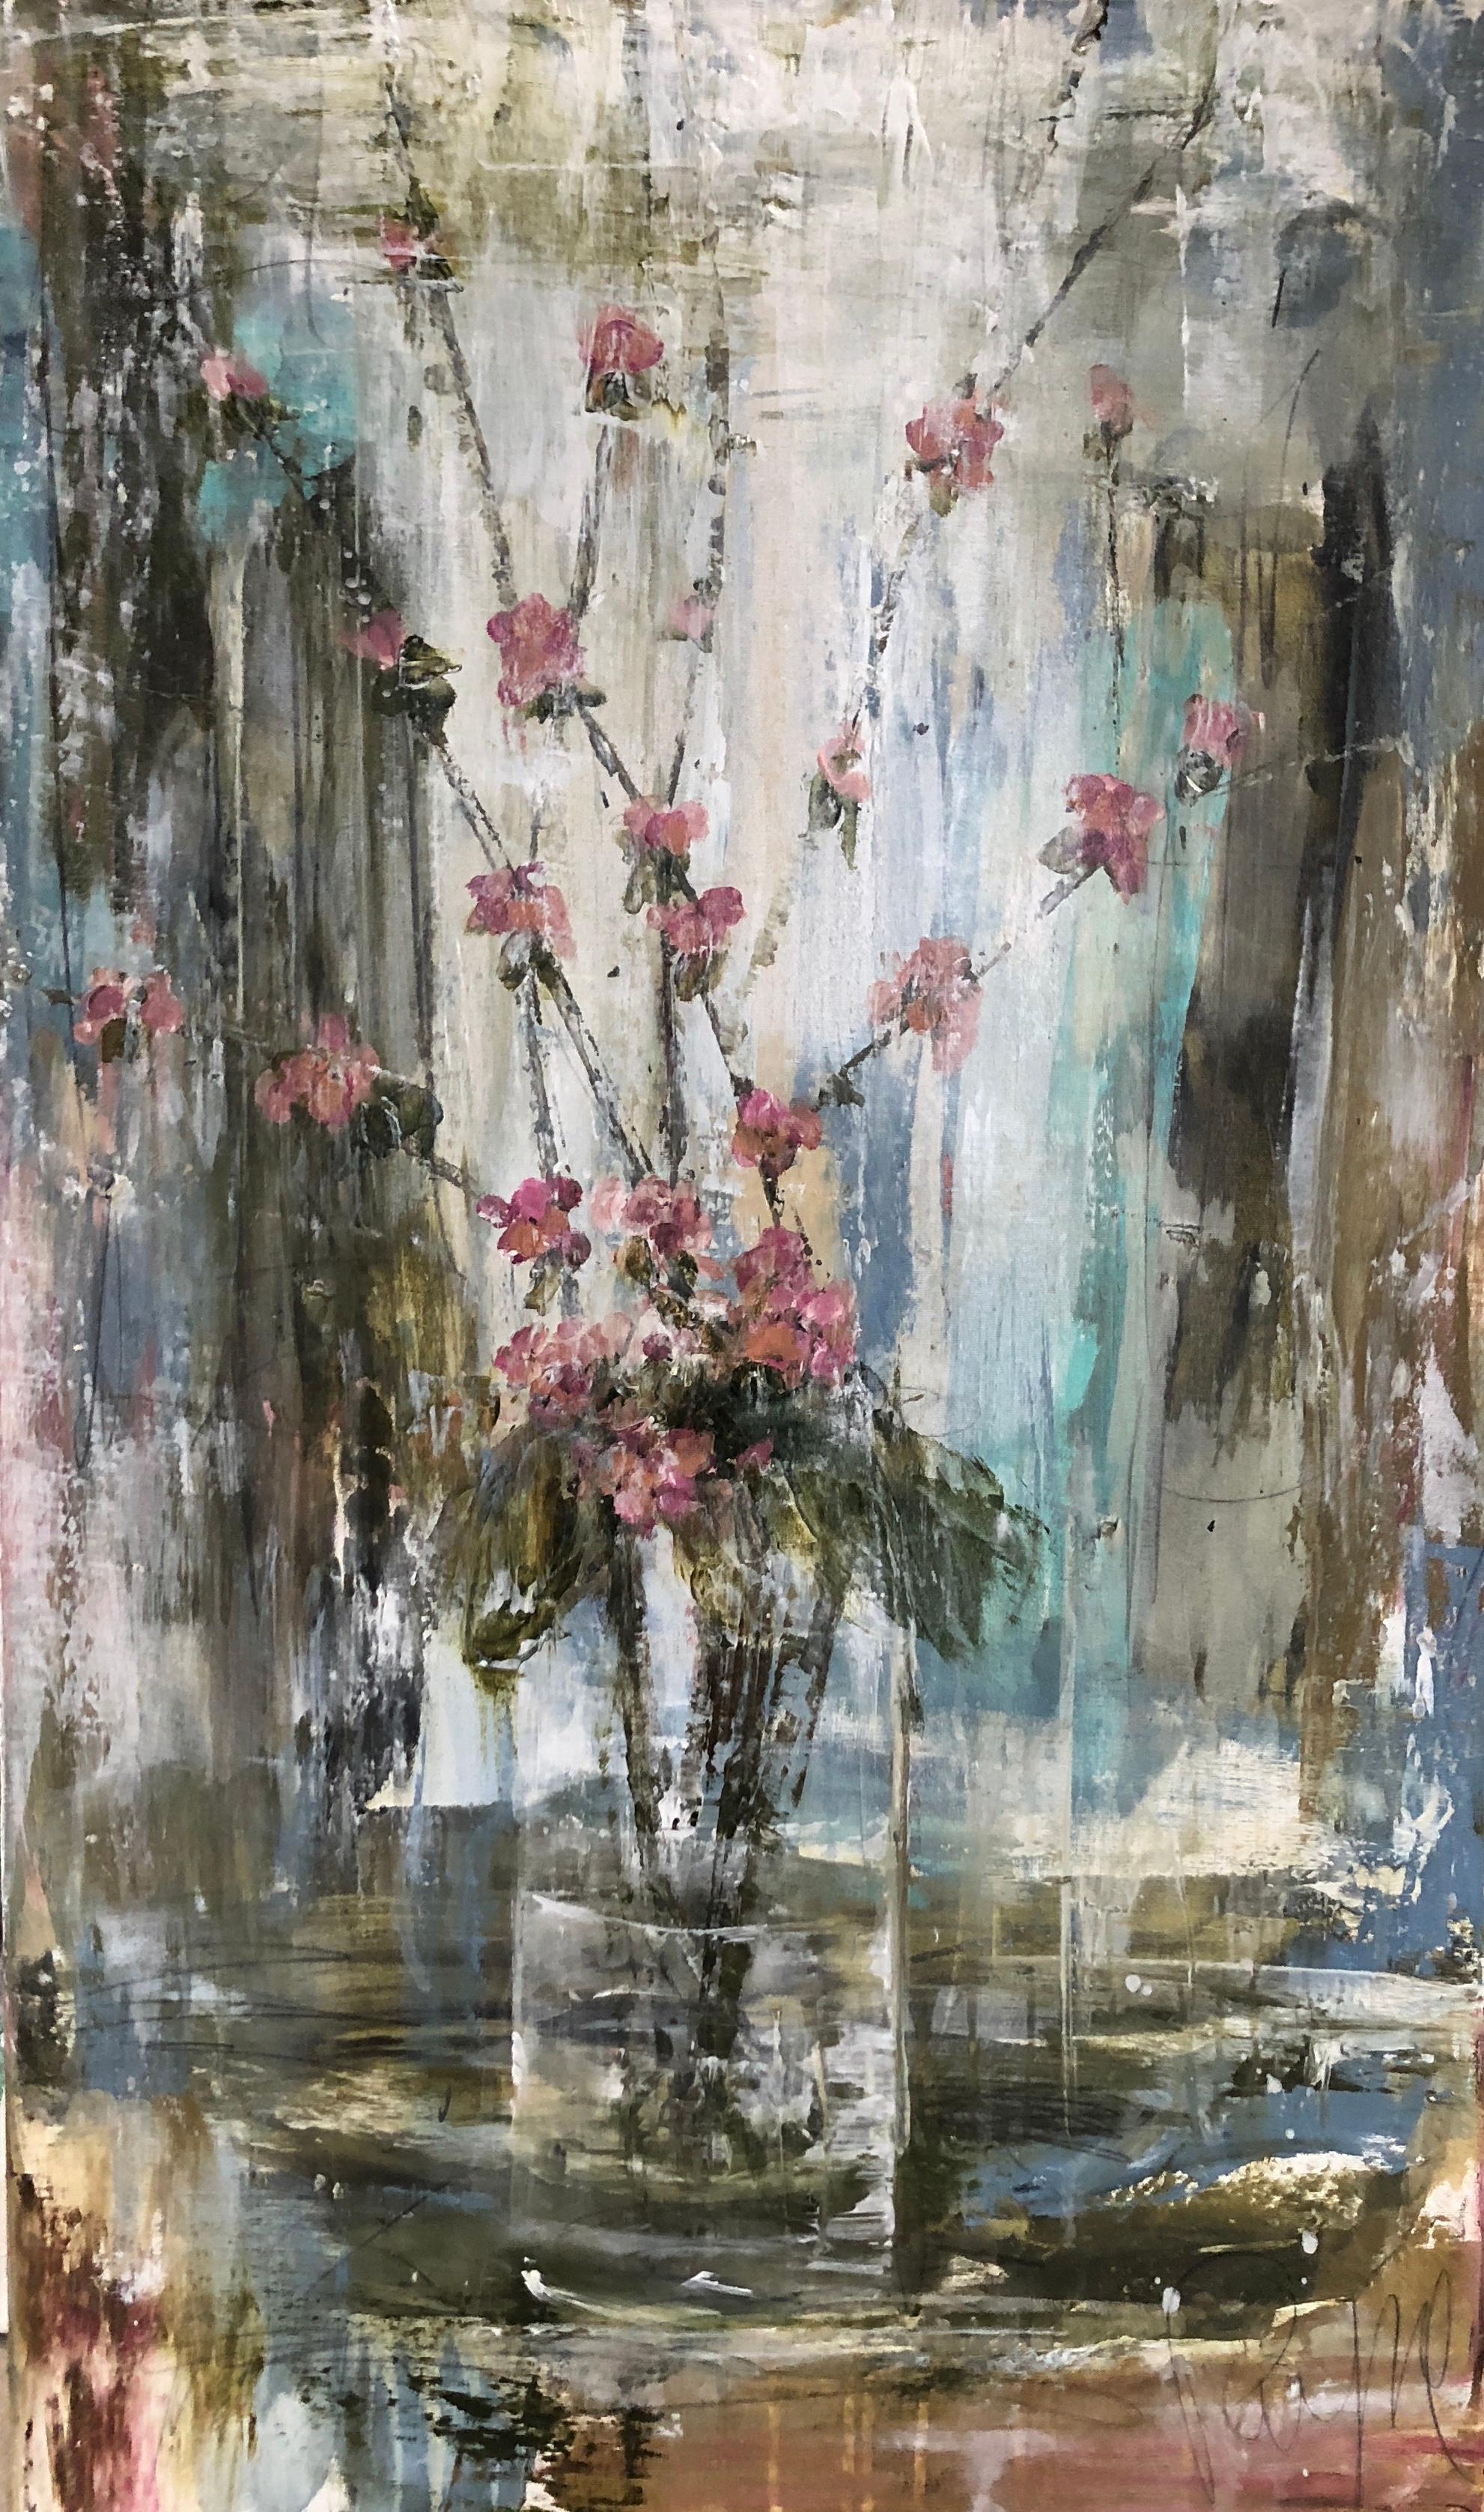 'Hearts Blossom' is a medium size vertical contemporary abstract floral mixed media on canvas painting created by American artist Melissa Payne Baker in 2018. Featuring a delicate arrangement of branches of flower blossoms displayed inside a glass